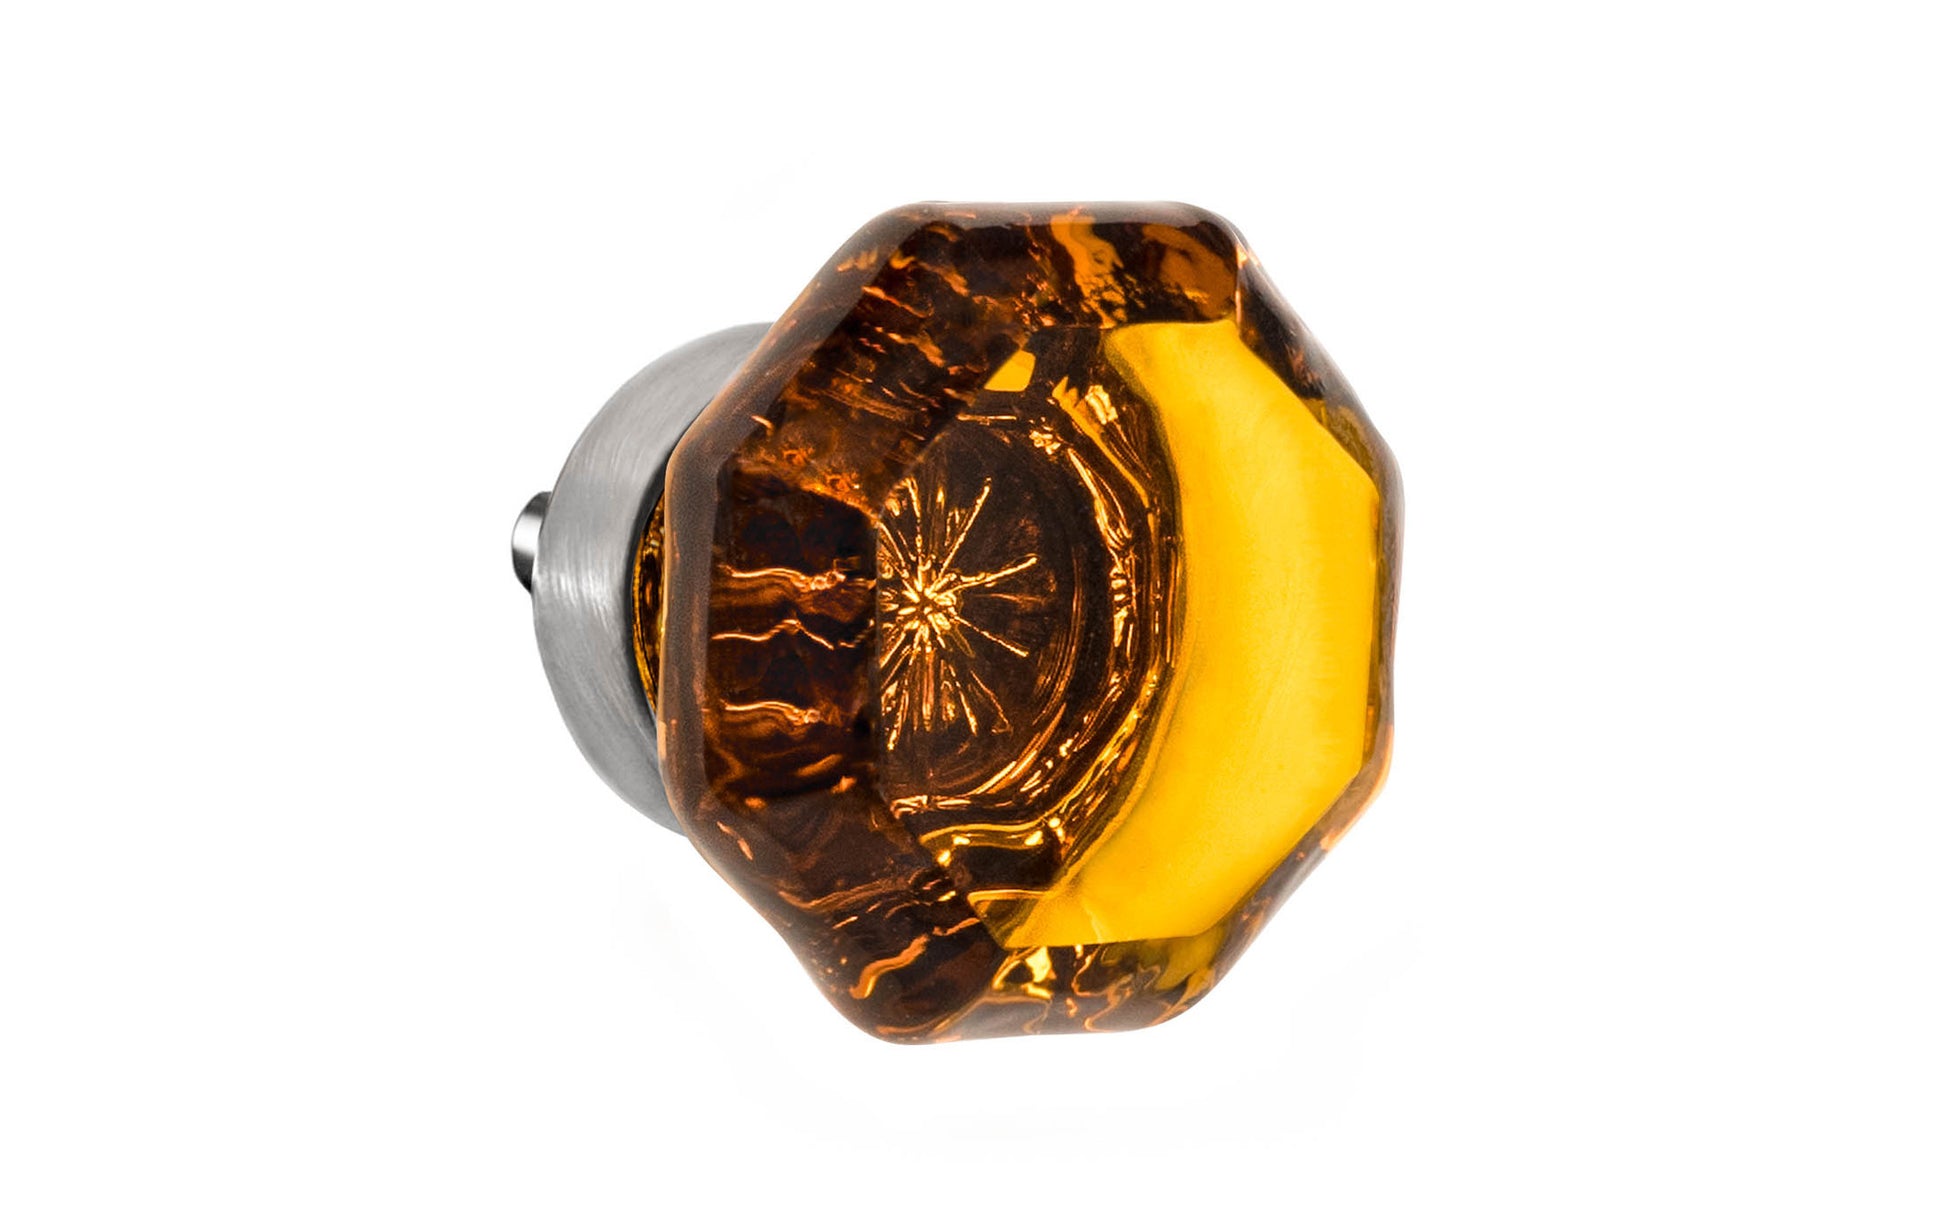 Elegant & classic octagonal cabinet glass knob with an attractive "Amber" color. The glass is carefully set into a handsome solid brass base with a threaded shank in the back. Brushed nickel finish on solid brass base. Octagon shape knob. 1-1/4" Diameter Knob